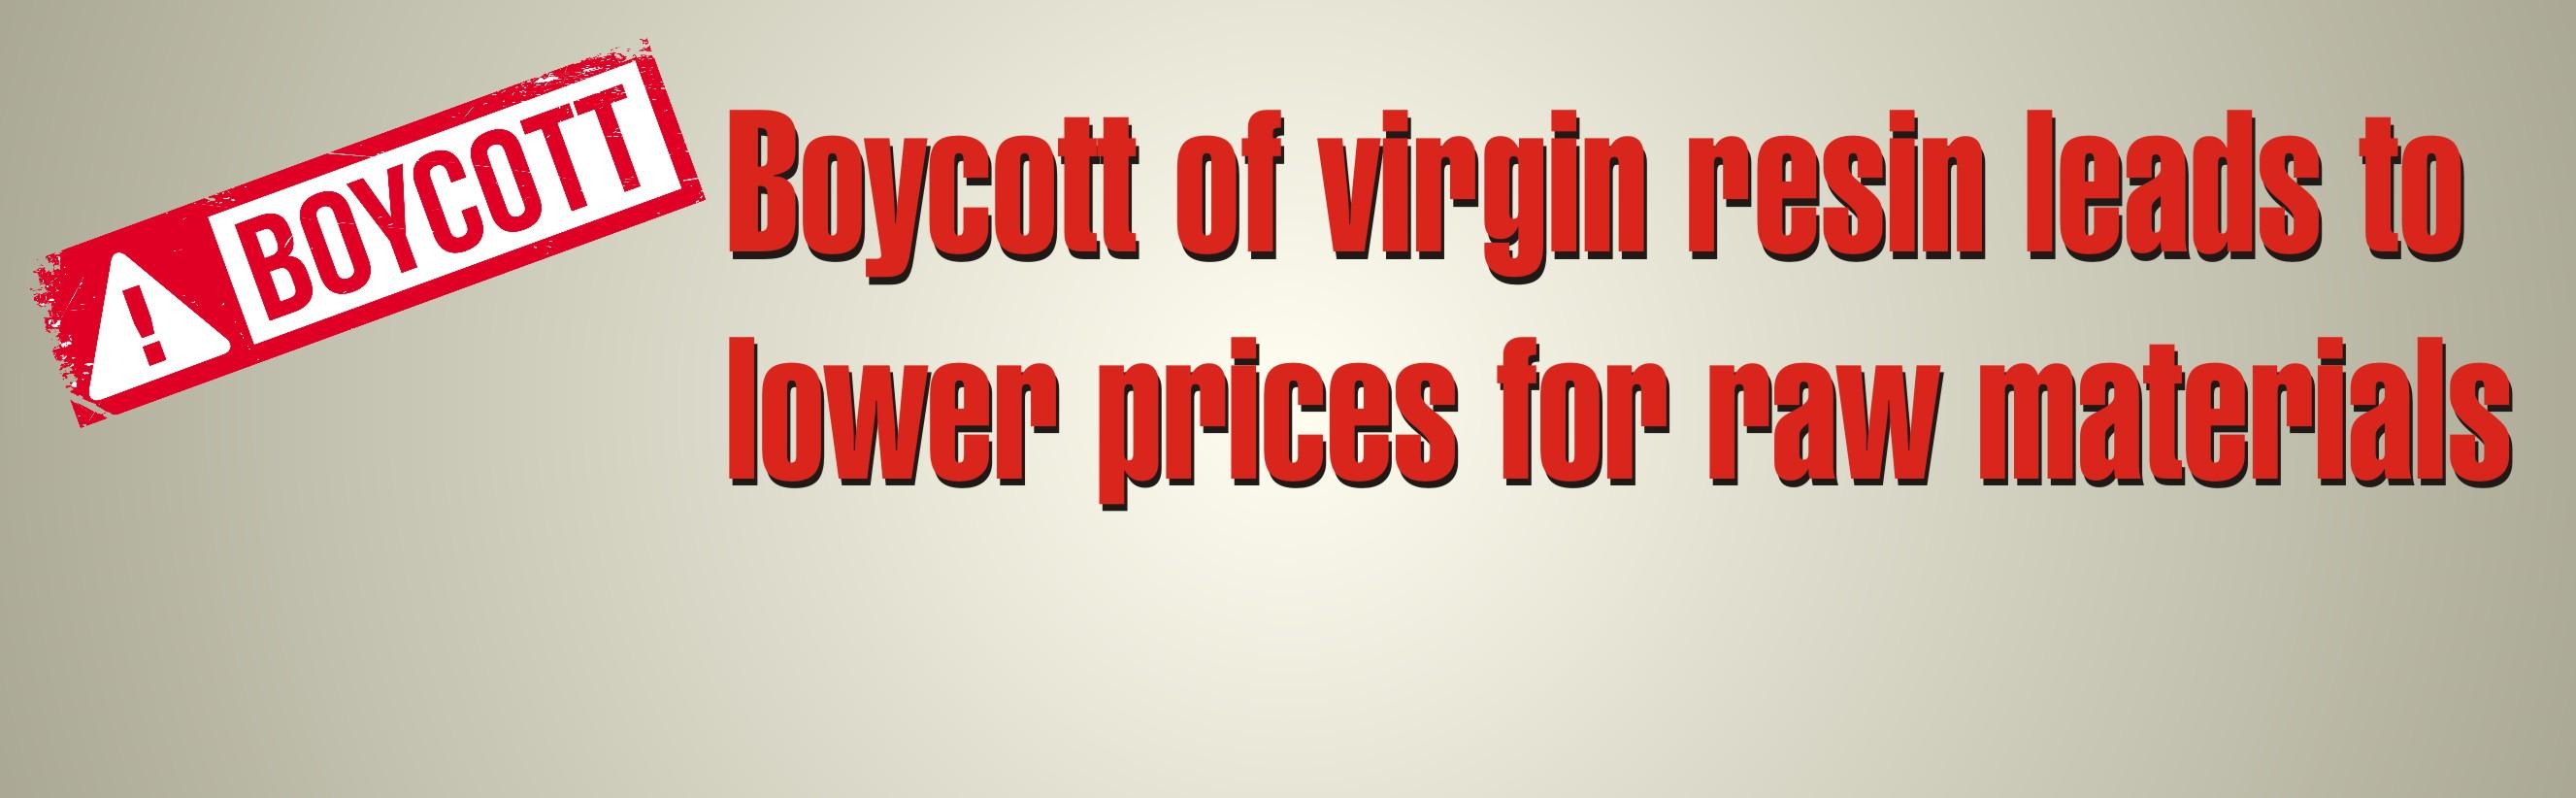 Boycott of virgin resin leads to lower prices for raw materials